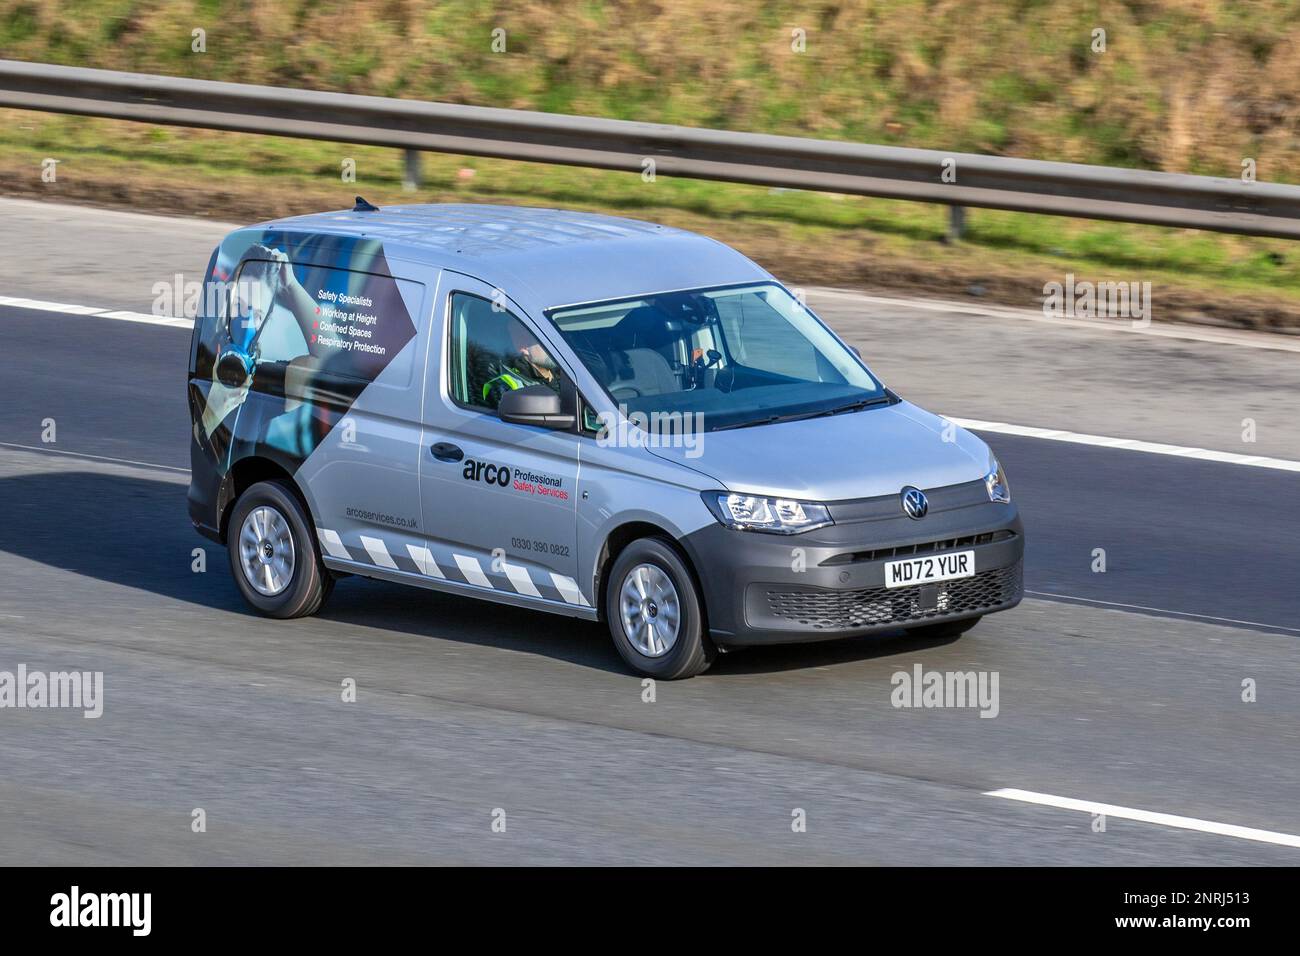 ARCO, a supplier of safety equipment, workwear, safety boots and shoes, gloves and maintenance supplies.  2023 VW VOLKSWAGEN CADDY C20 COMMERCE TDI 1968cc Diesel 6 speed manual; travelling on the M6 motorway, UK Stock Photo